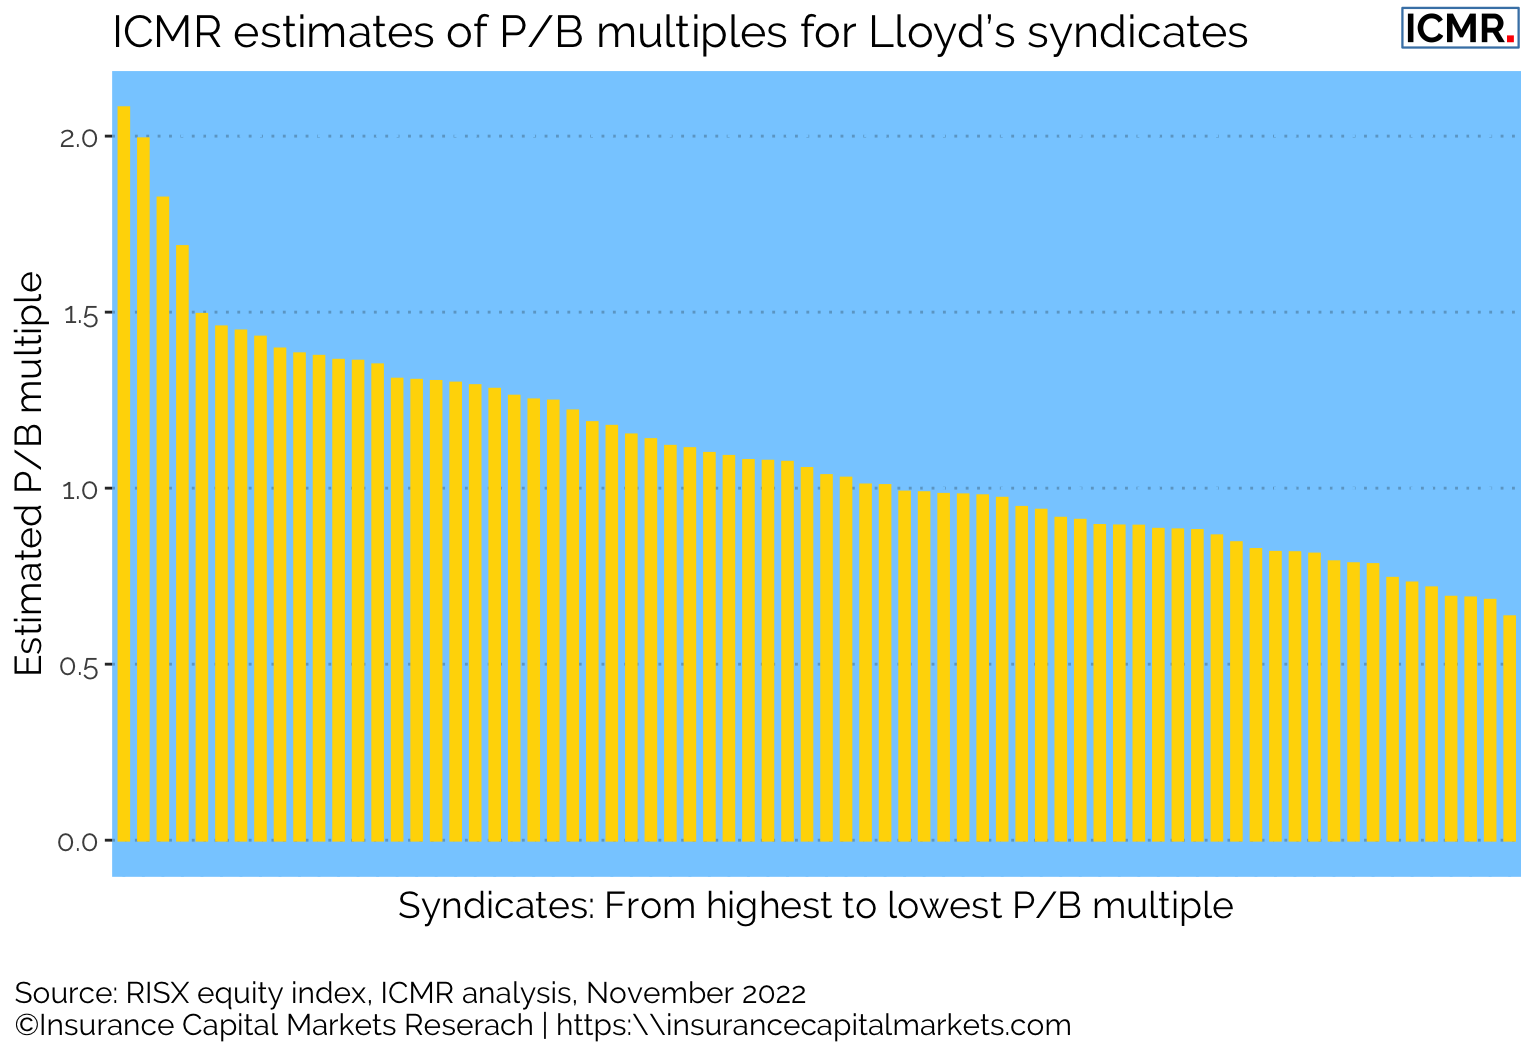 ICMR uses a mark-to-model to provide daily valuation of Lloyd’s syndicates, derived from the <a href='https://risxindex.com'>RISX equity index</a> and its constituents’ trailing balance sheet data, ICMR’s outside-in view on syndicates’ capital and trailing syndicate performance data.  Each syndicate is modelled as if it were a fully aligned entity with one capital provider.